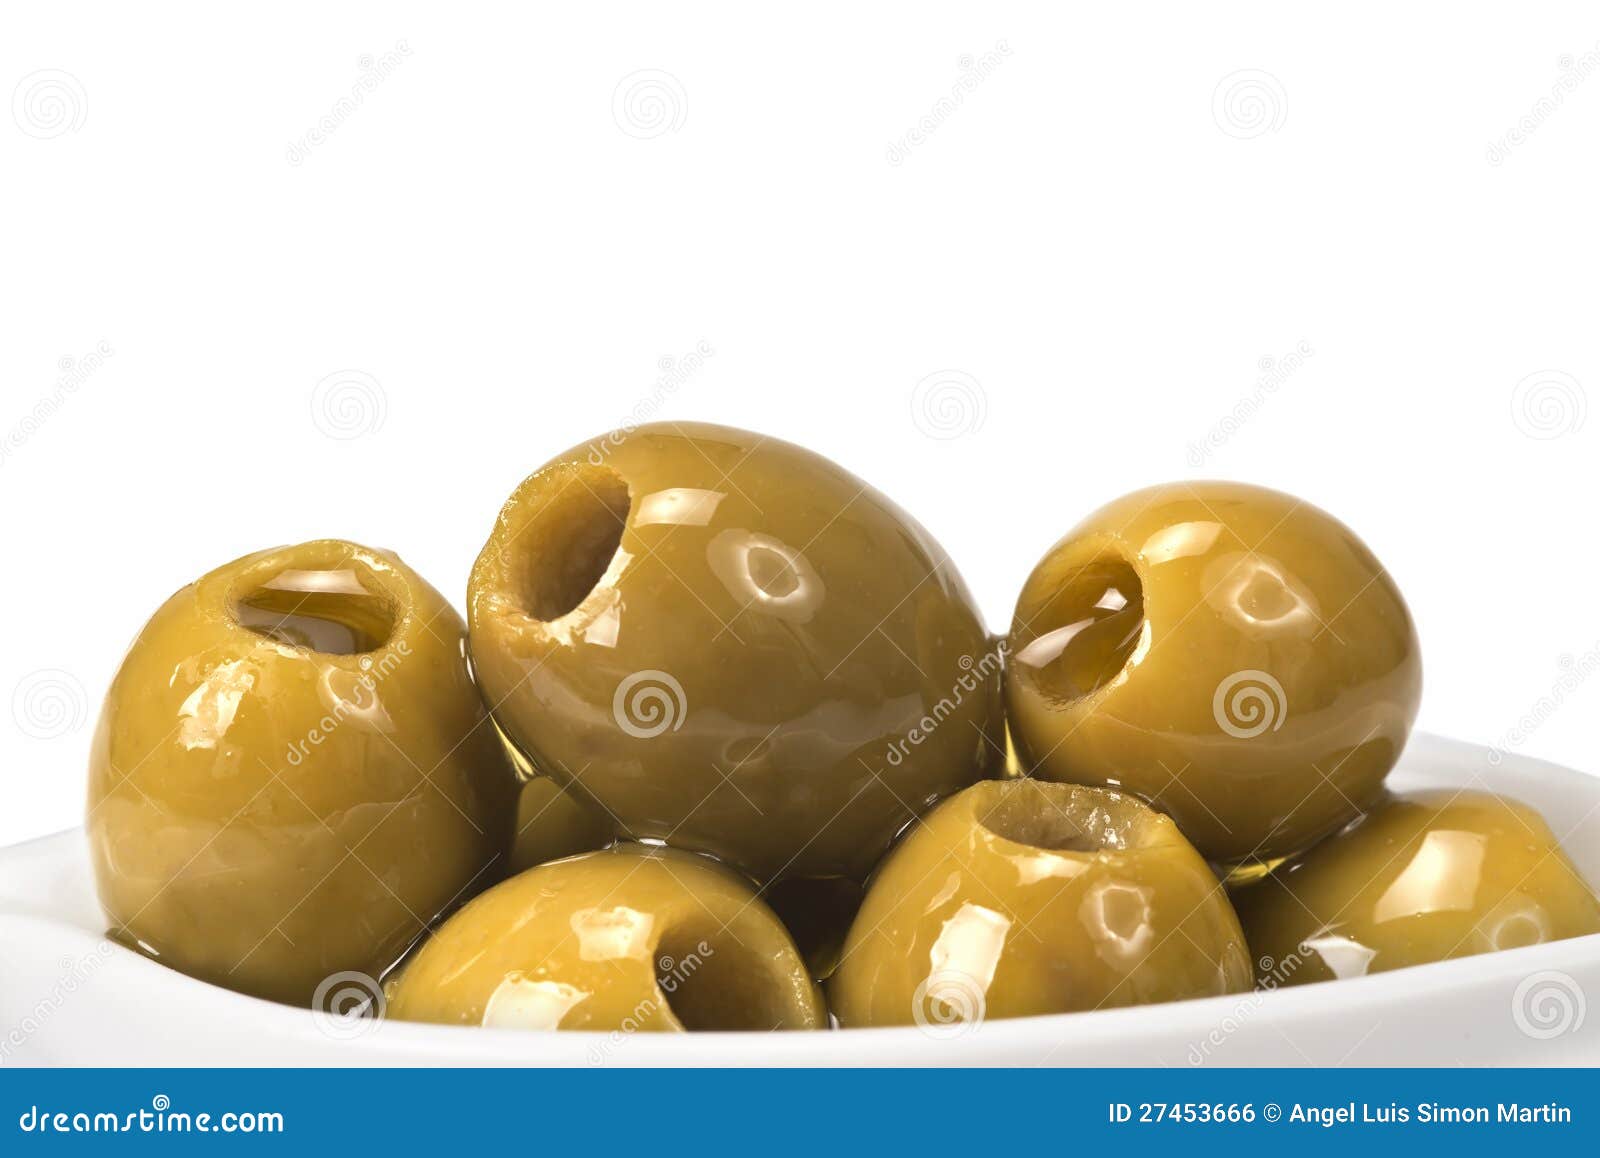 pitted olives on a white background